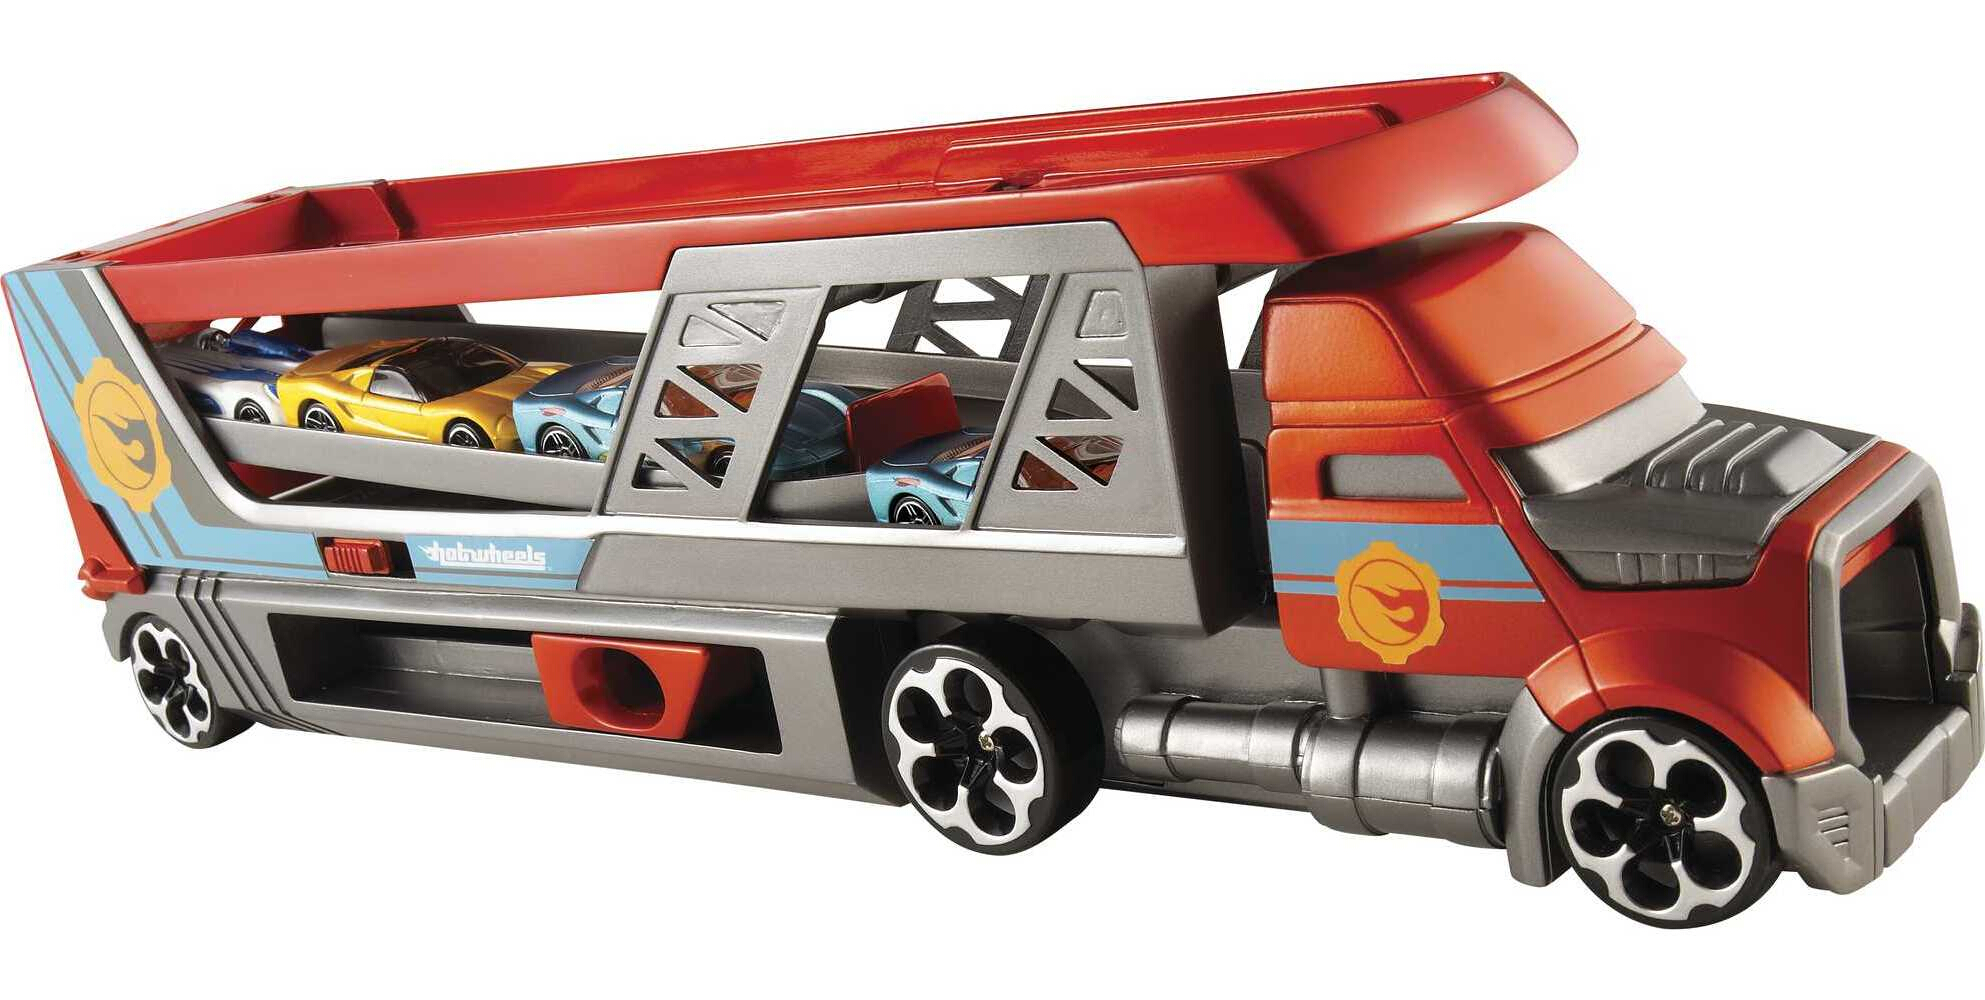 Hot Wheels City Blastin' Rig Hauler & 3 Toy Cars in 1:64 Scale, Launcher & Storage (4 Vehicles) - image 1 of 6